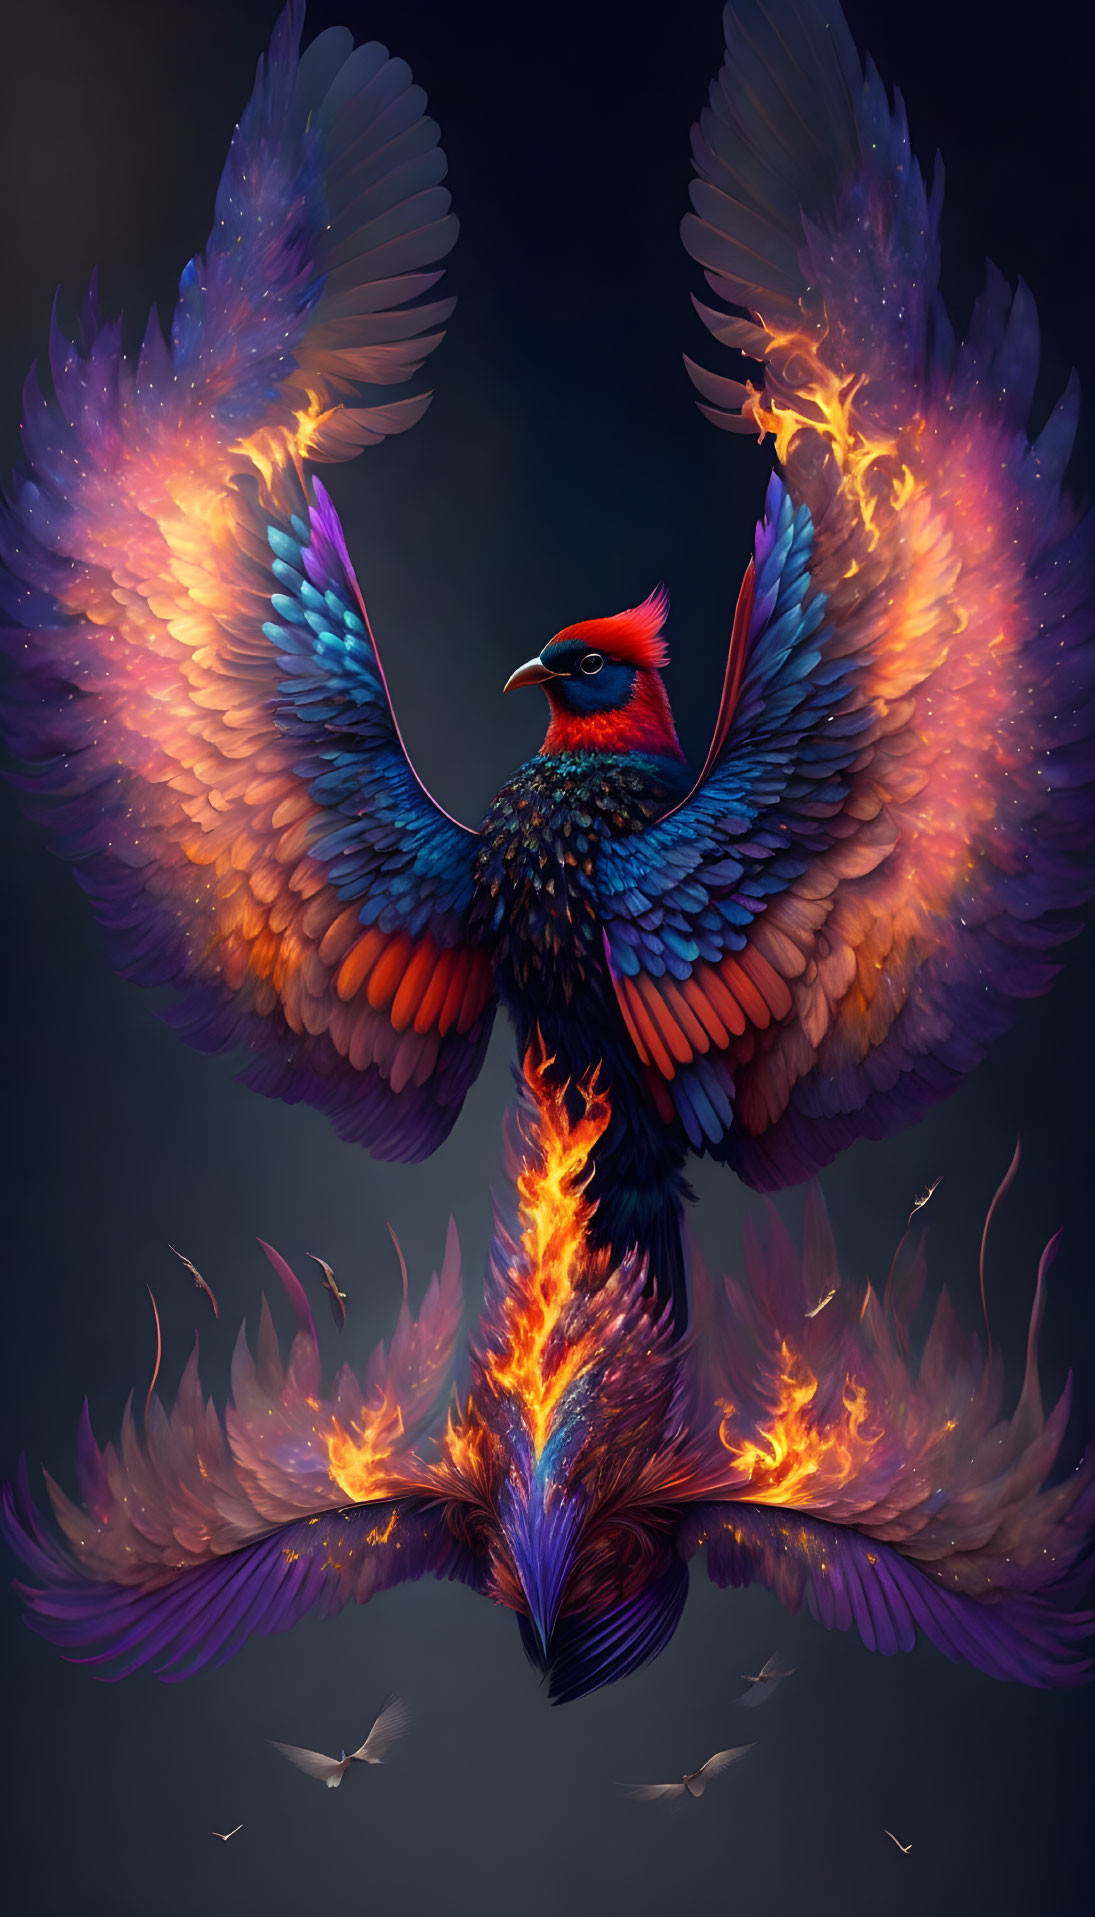 Majestic phoenix illustration with vibrant flaming wings